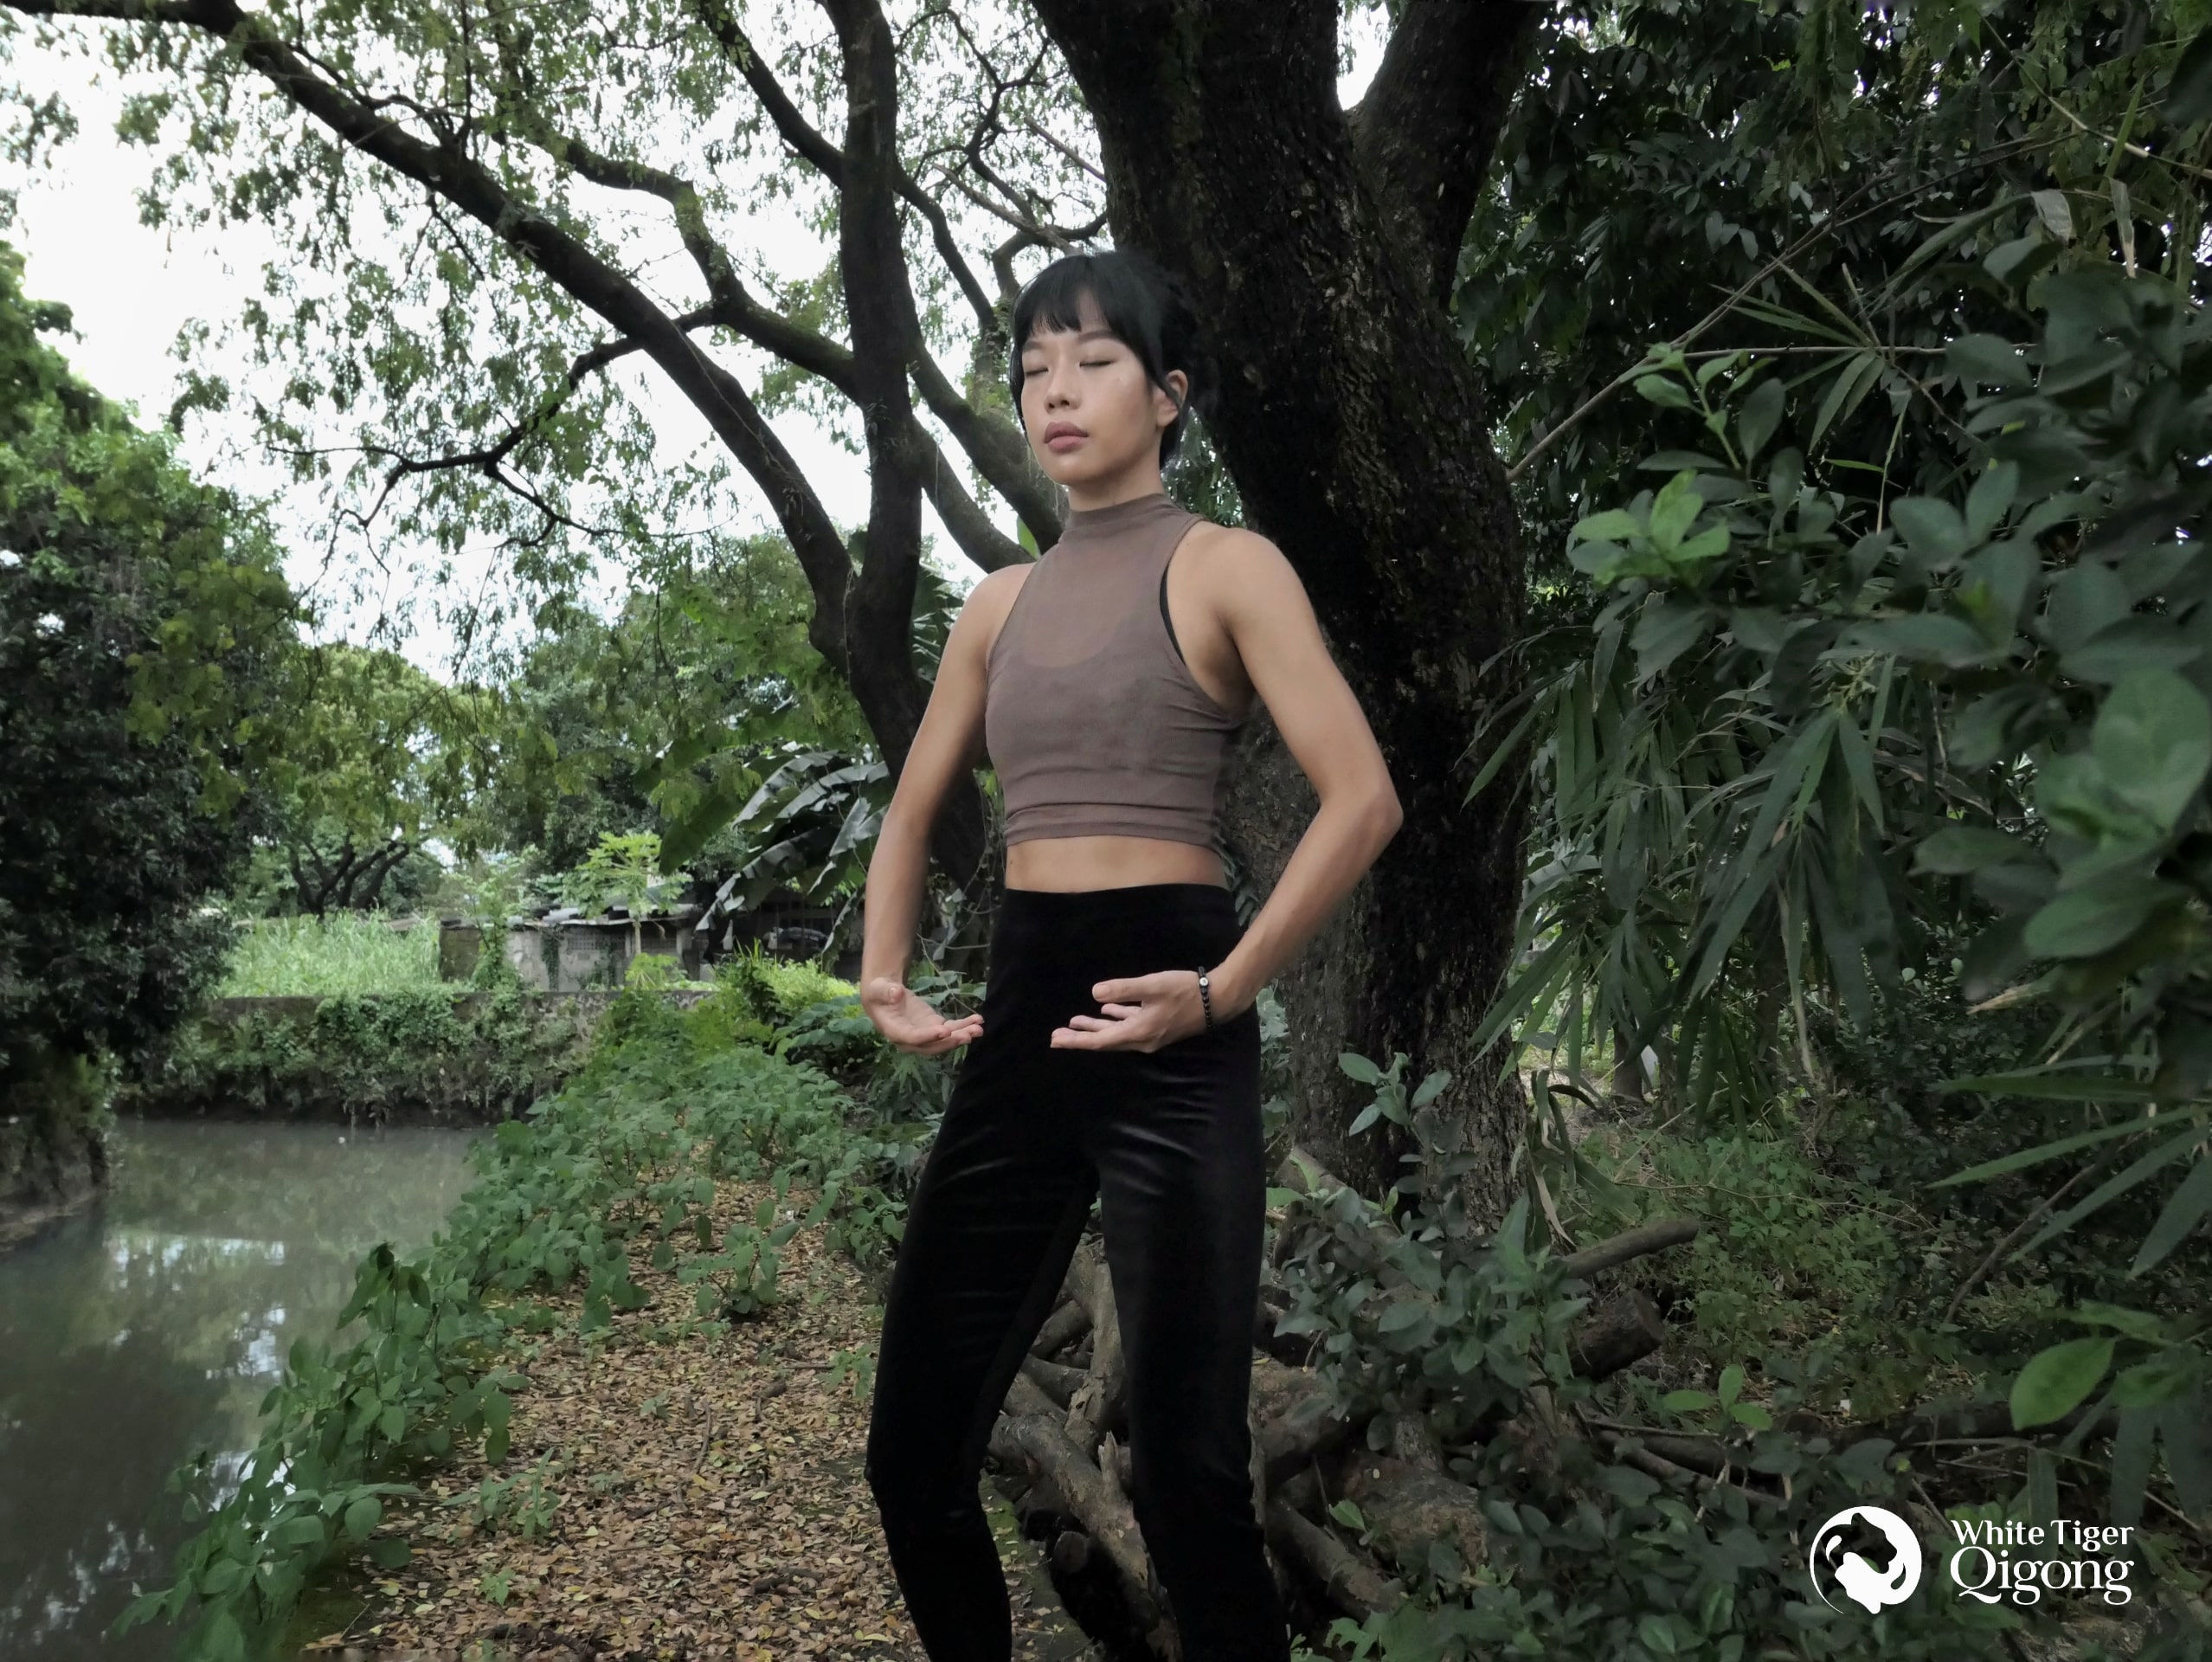 Qigong Poses - A woman practicing Holding The Ball Zhan Zhuang qigong pose surrounded by nature